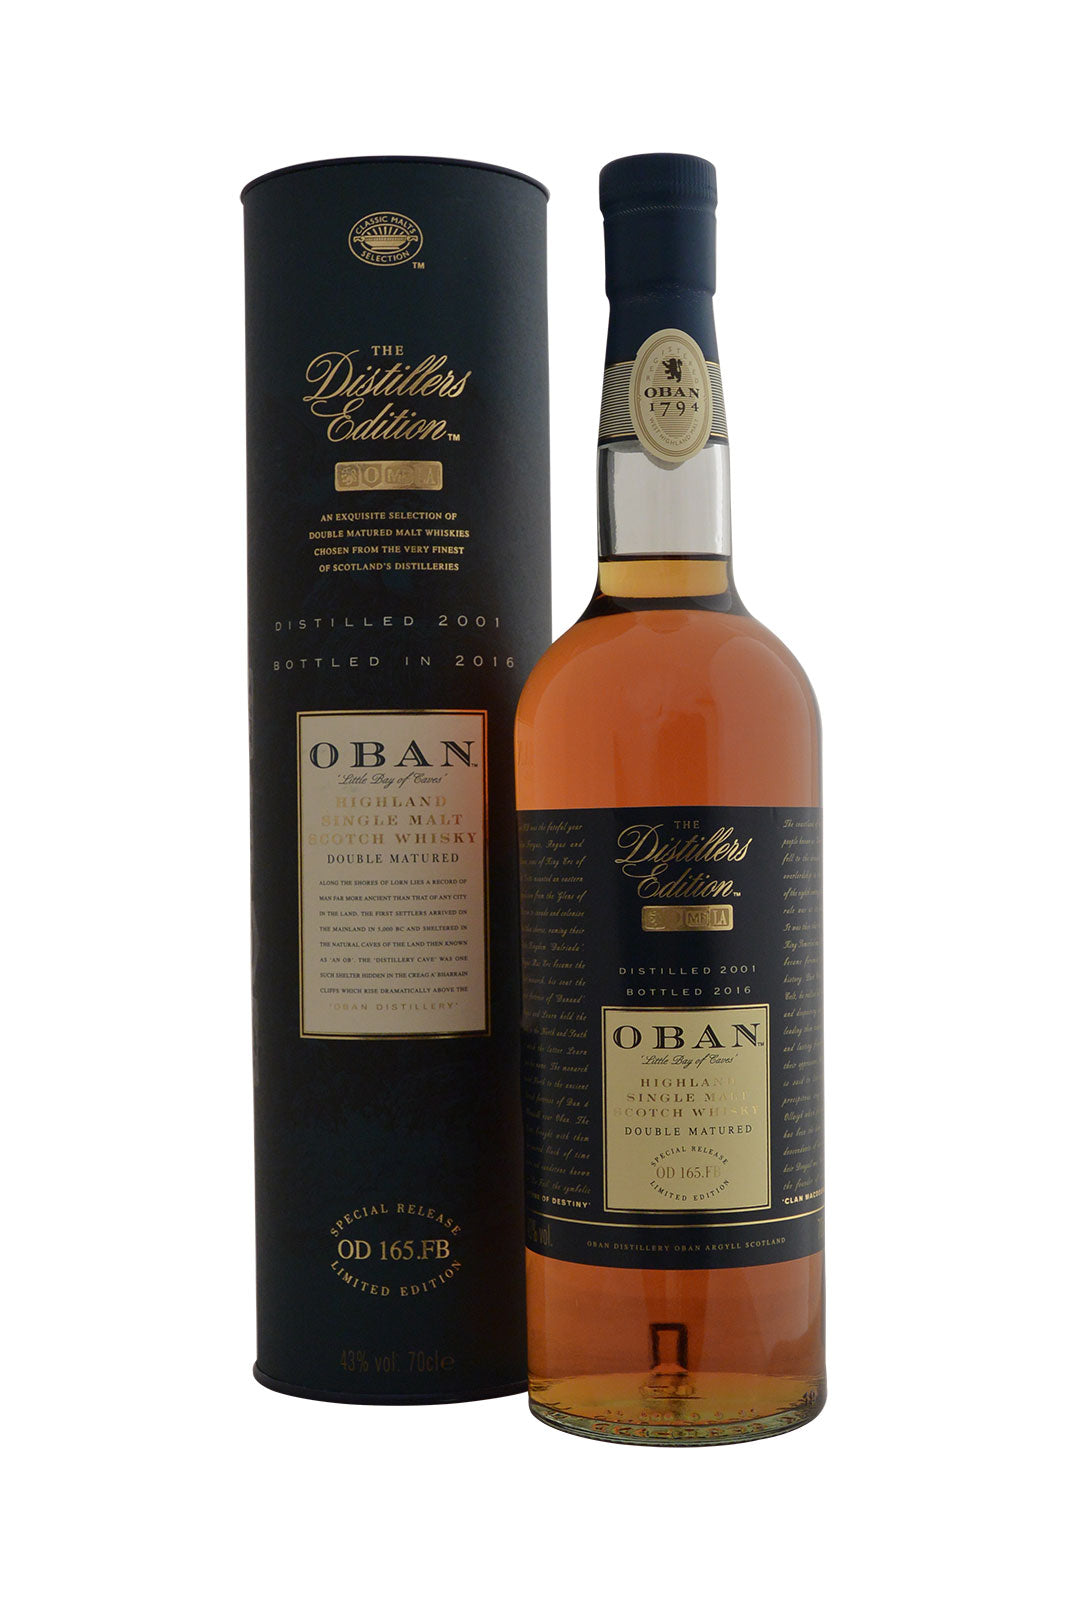 Oban Distillers Edition Double Matured